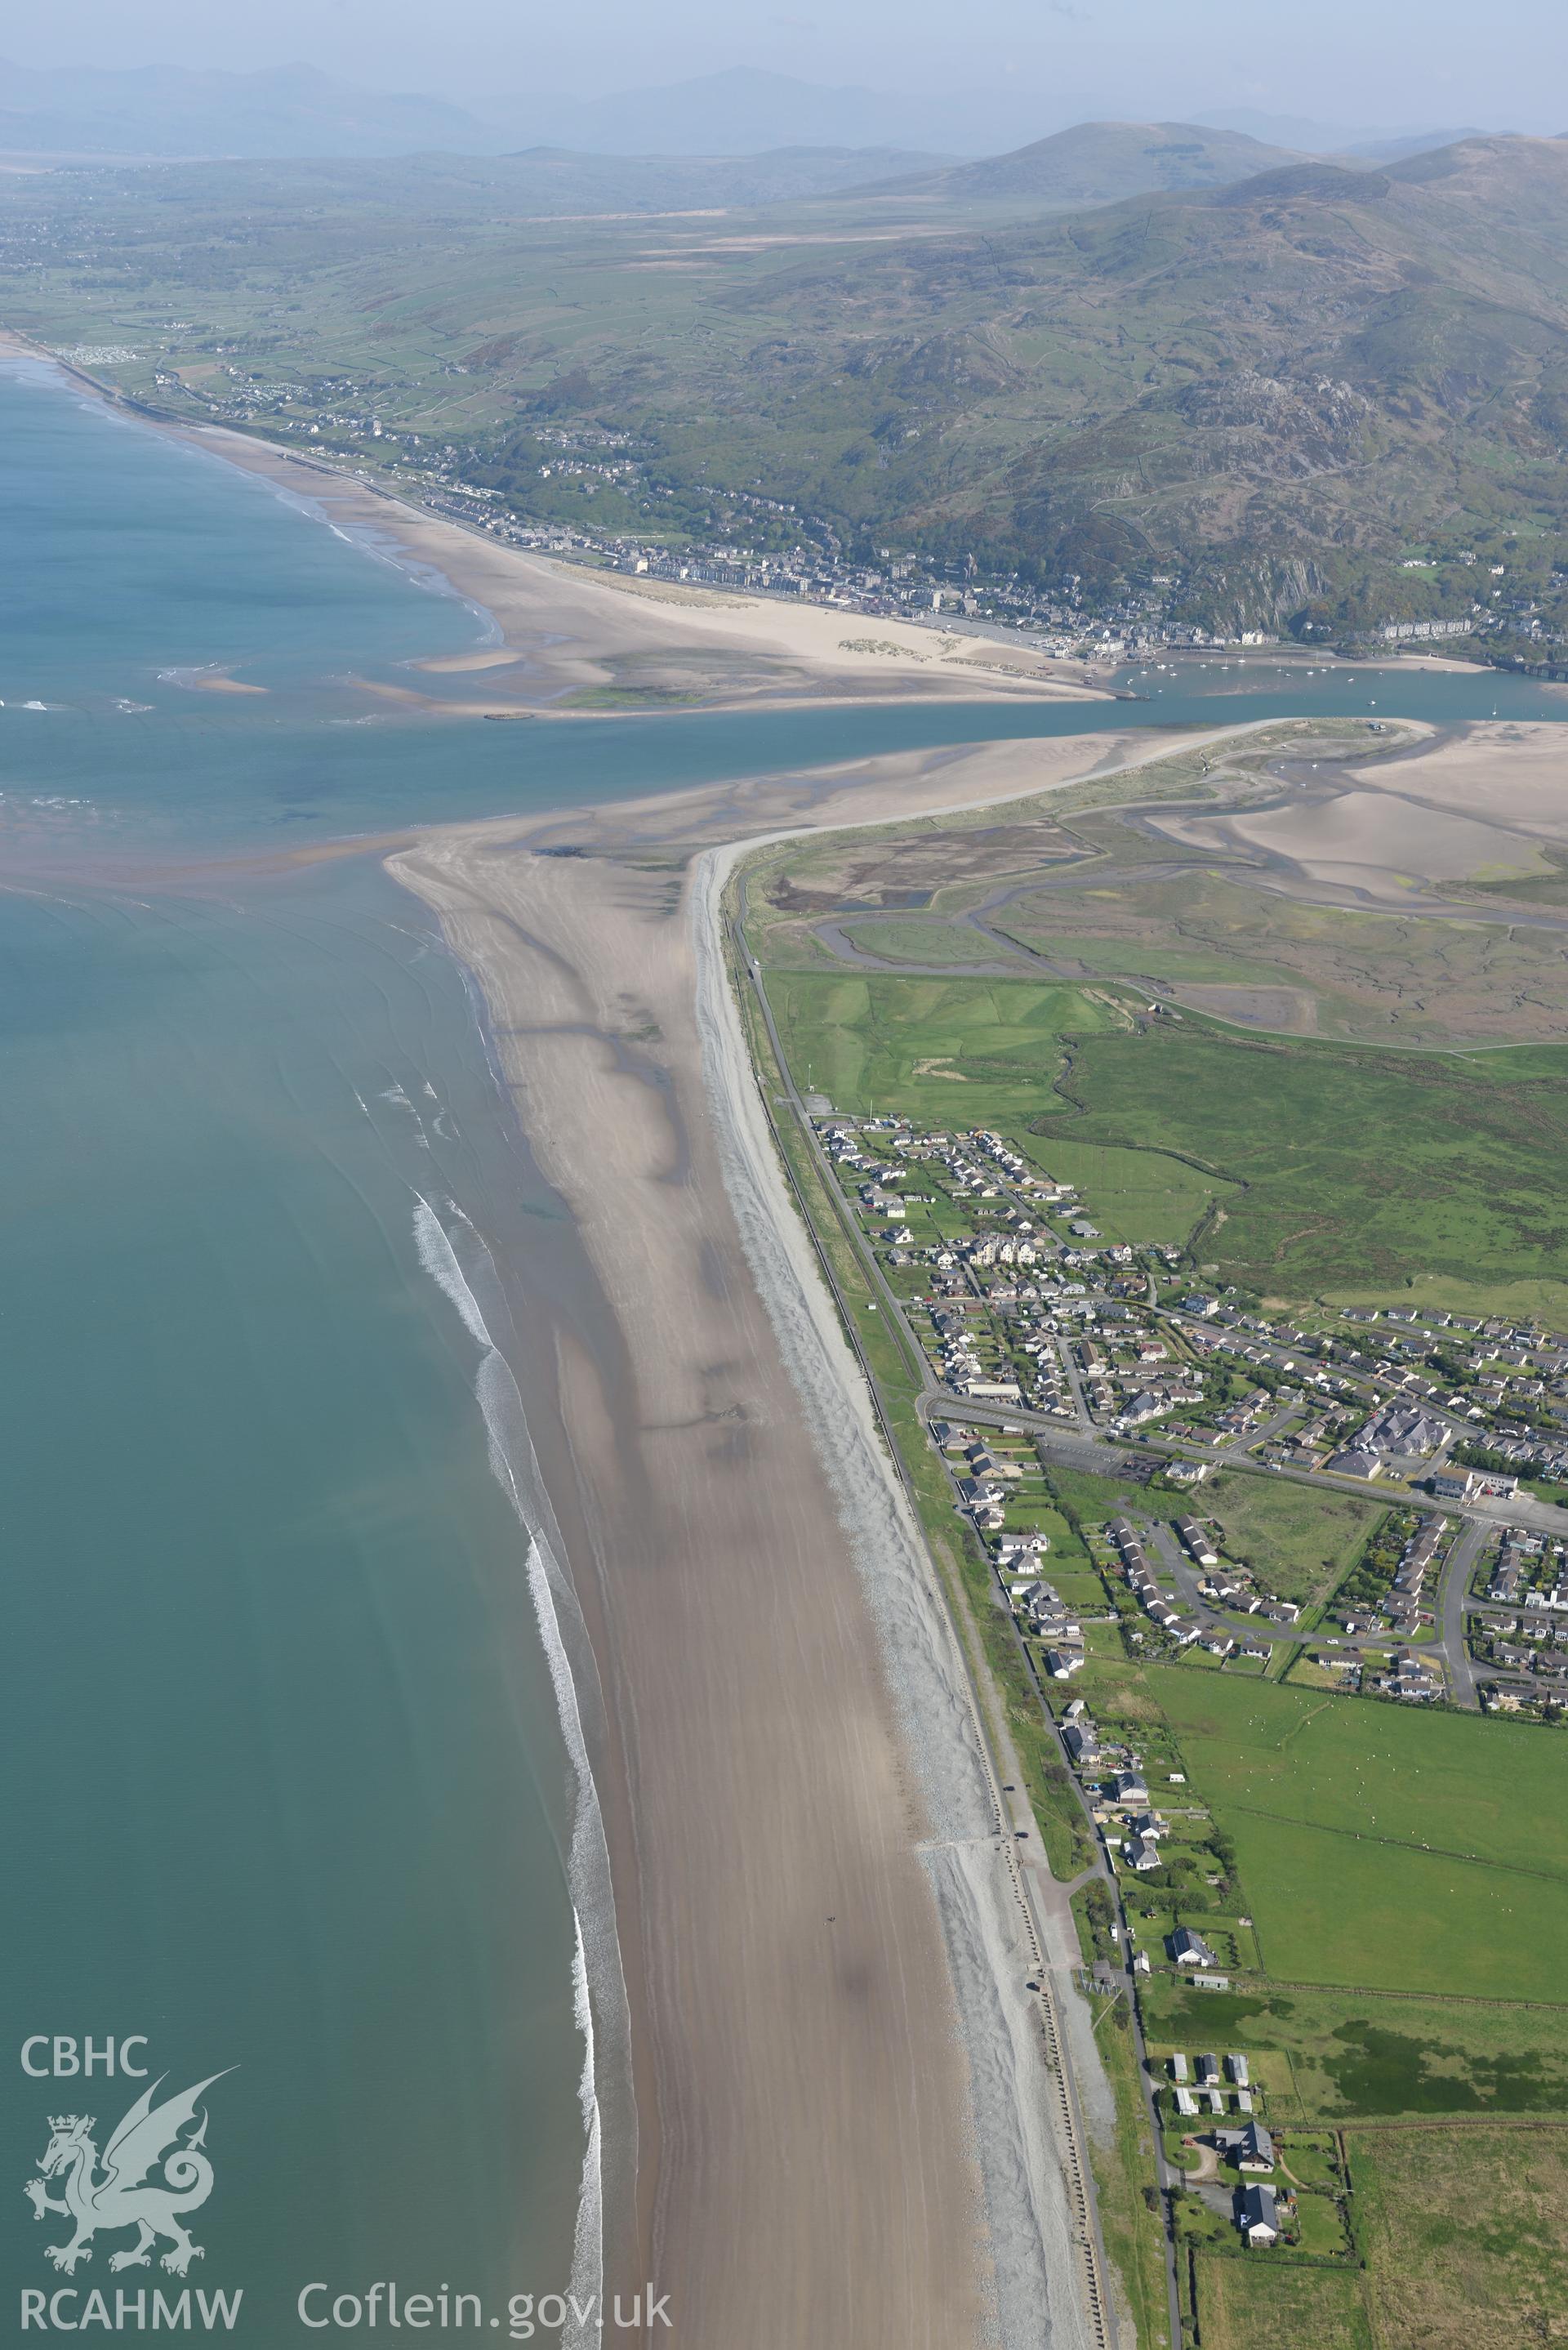 Aerial photography of Fairbourne taken on 3rd May 2017.  Baseline aerial reconnaissance survey for the CHERISH Project. ? Crown: CHERISH PROJECT 2017. Produced with EU funds through the Ireland Wales Co-operation Programme 2014-2020. All material made freely available through the Open Government Licence.